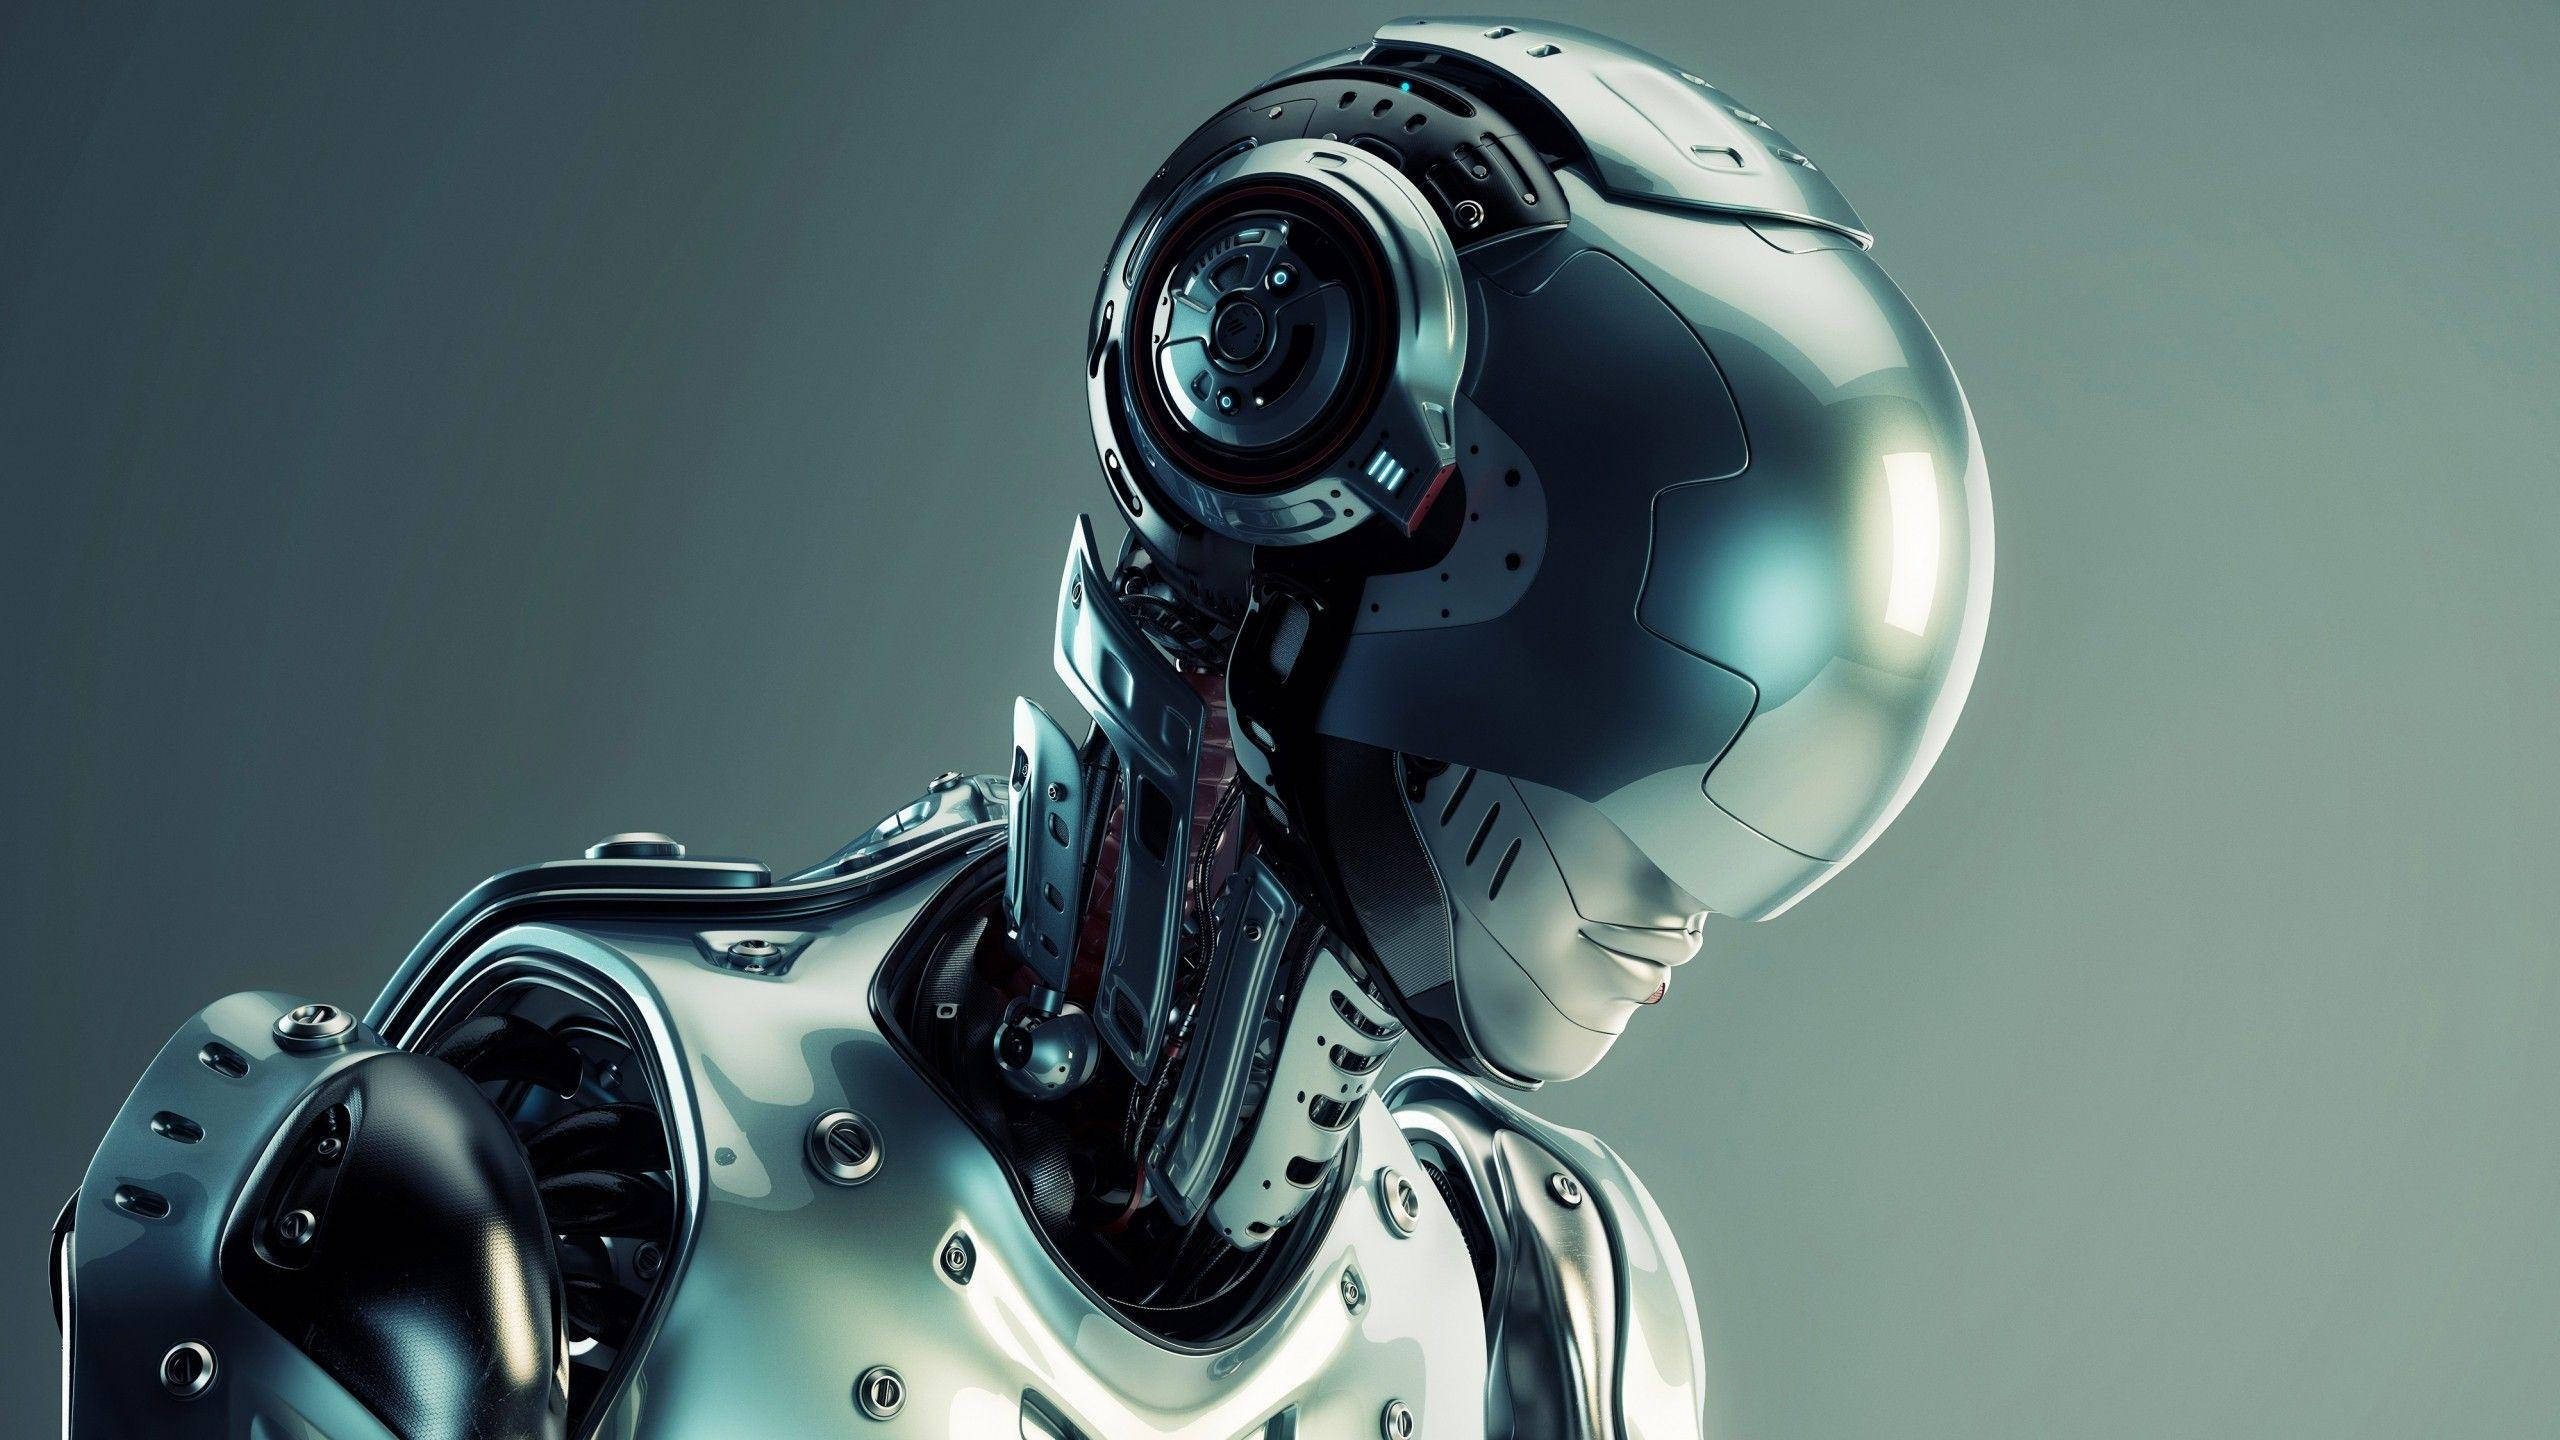 Free Robot Wallpaper Downloads, [400+] Robot Wallpapers for FREE |  